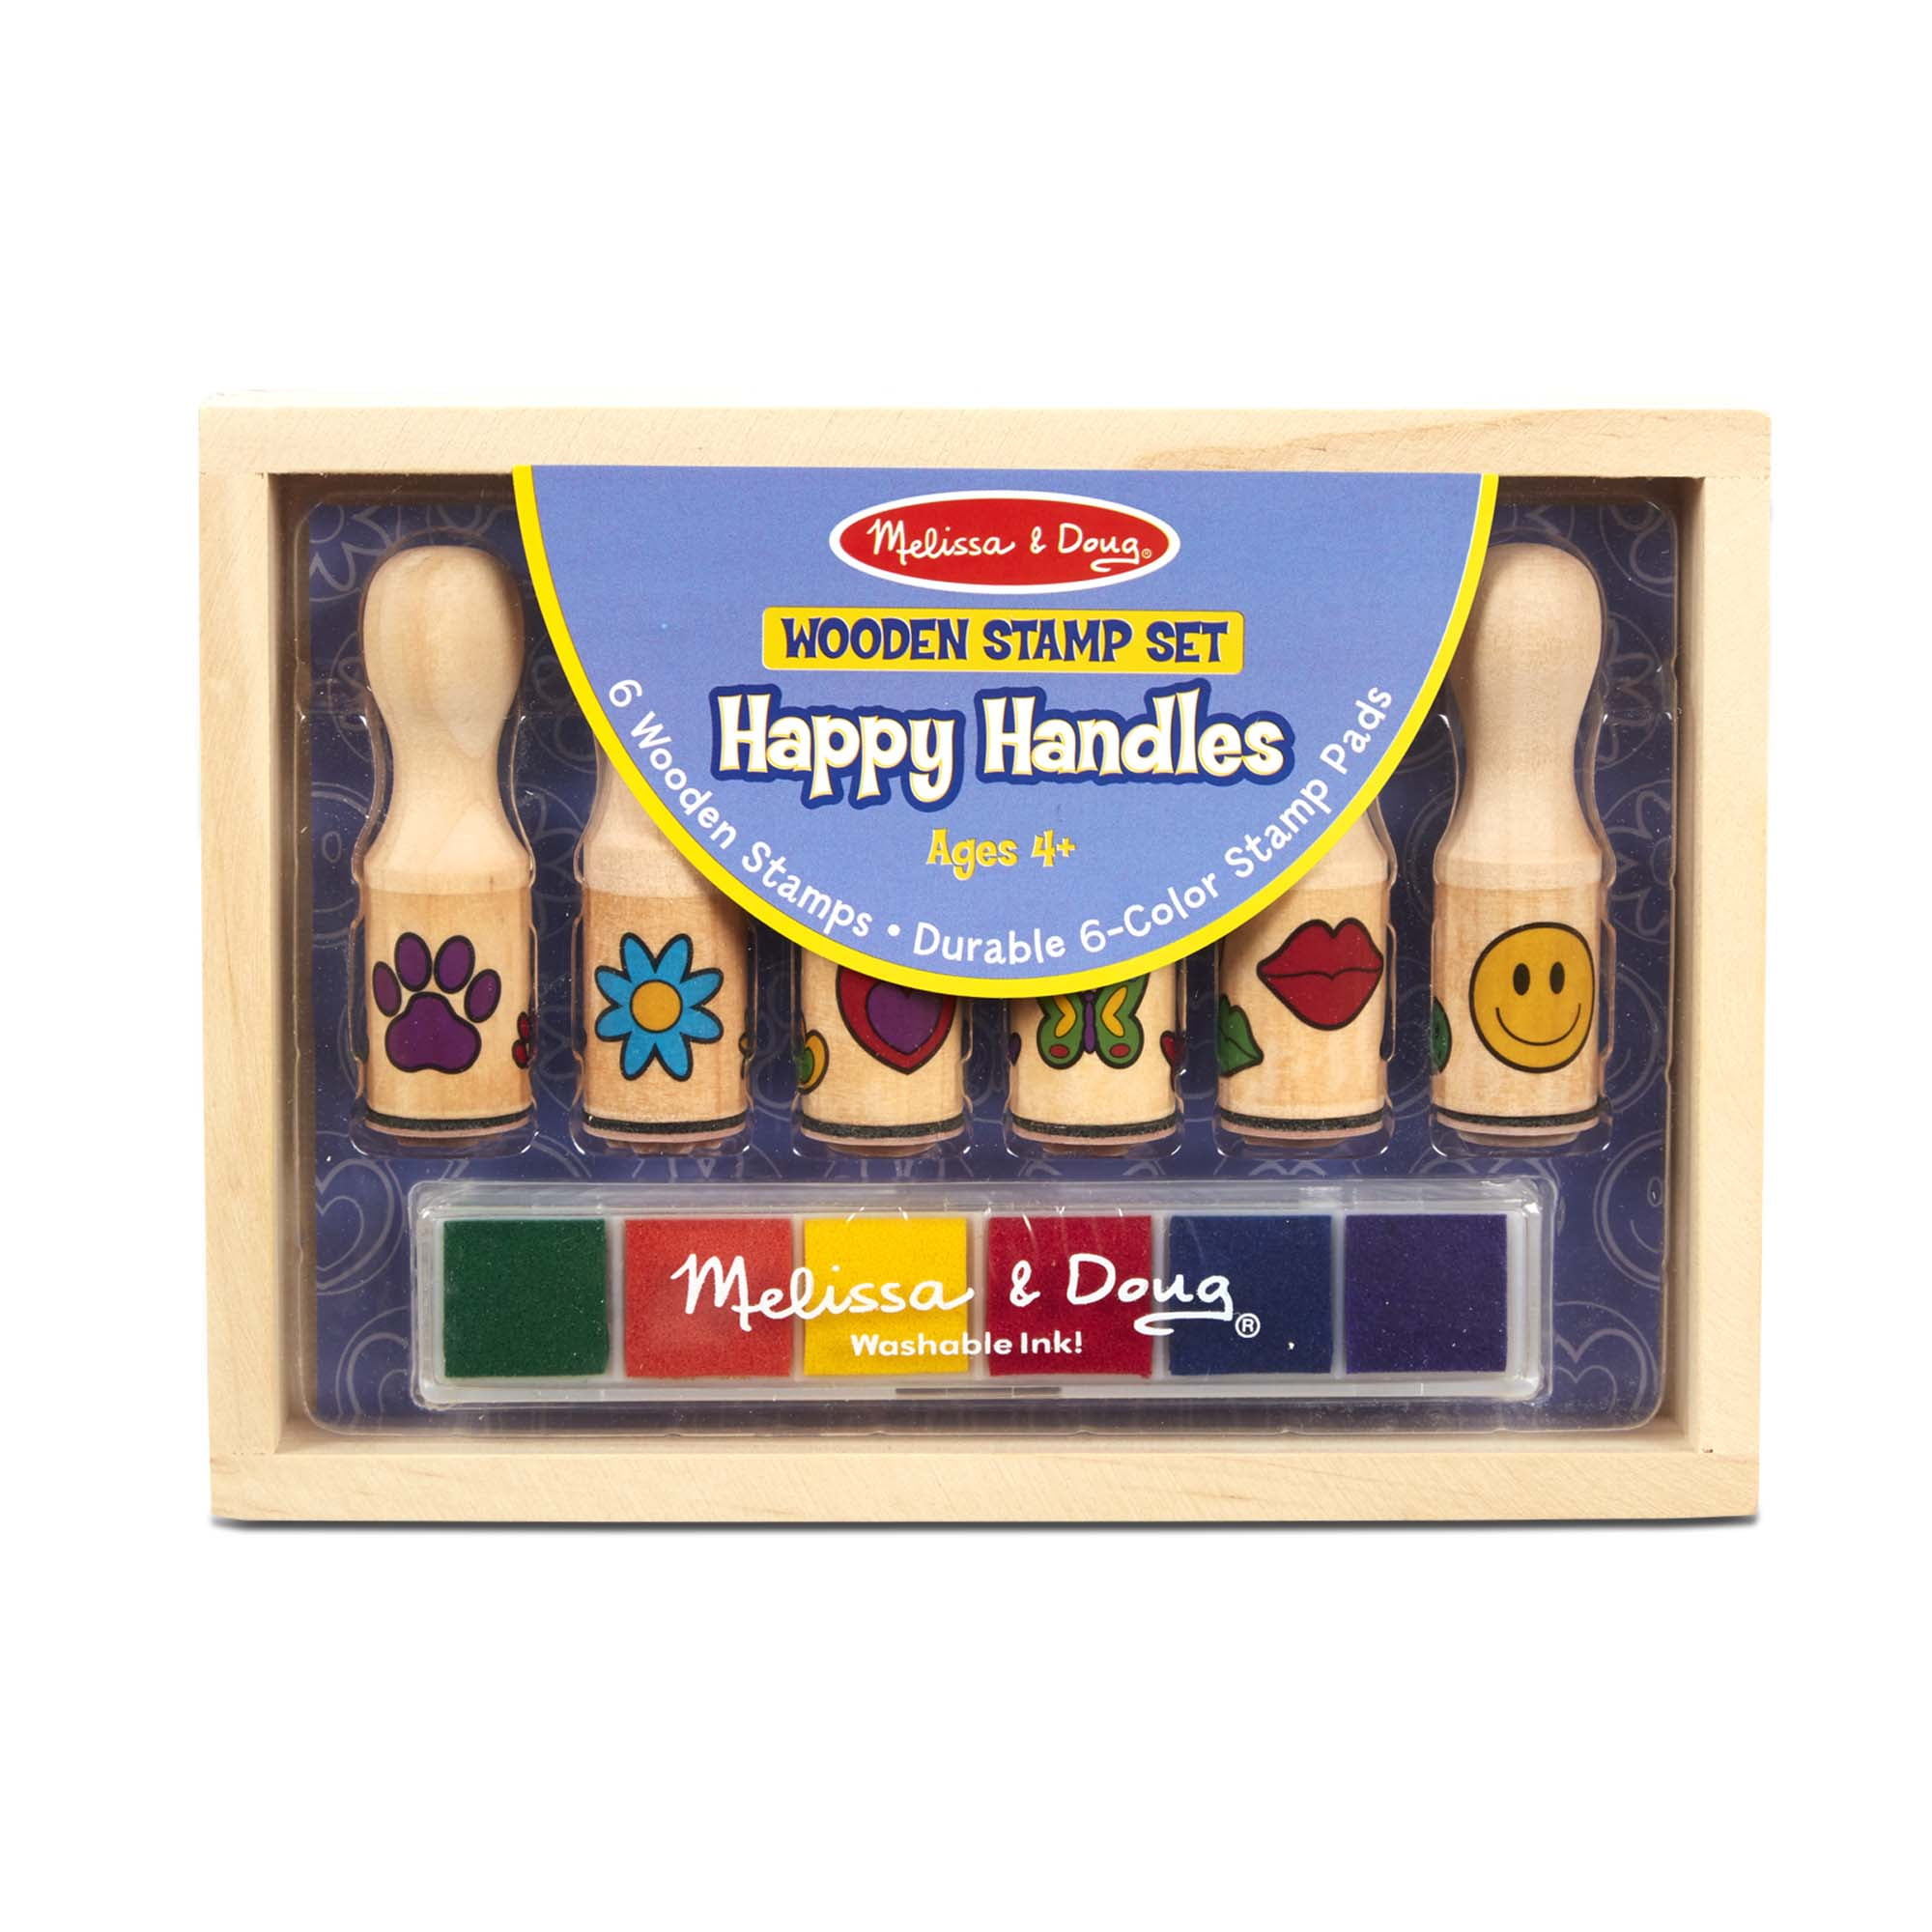 6 Stamps and 6-Color Stamp Pad Melissa & Doug Happy Handles Wooden Stamp Set 